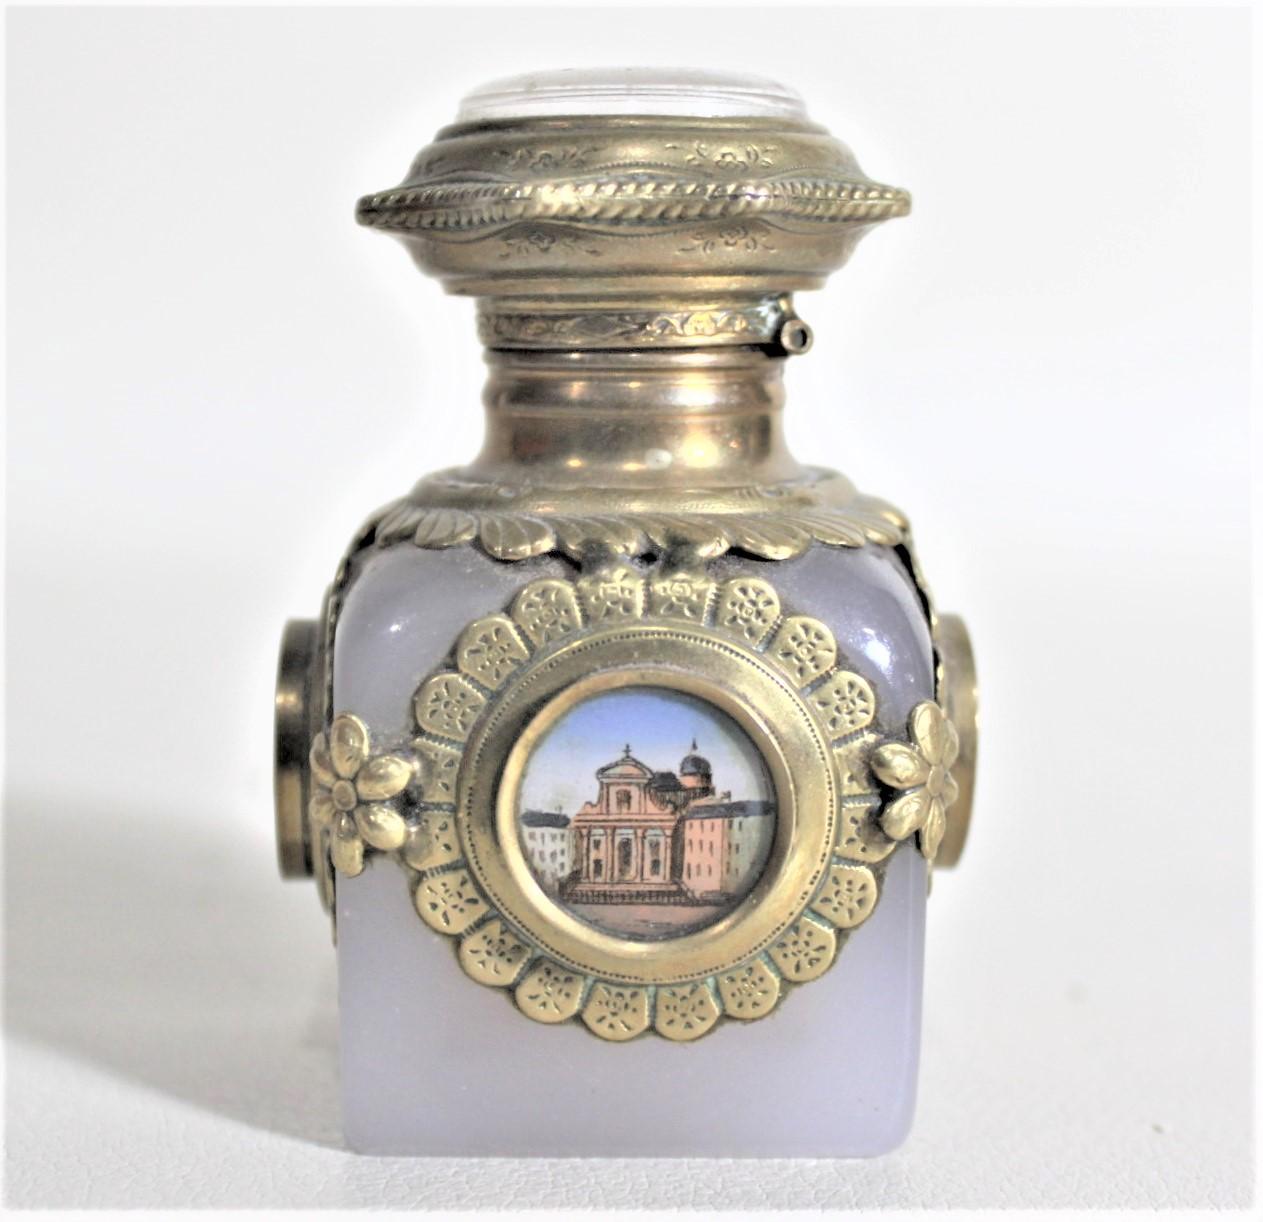 This antique opalescent perfume bottle is unsigned, but presumed to have been made in Europe, likely in France or Italy in circa 1890 for a Grand Tour in the period Victorian style1. This perfume bottle has decorative brass mounts on all four sides